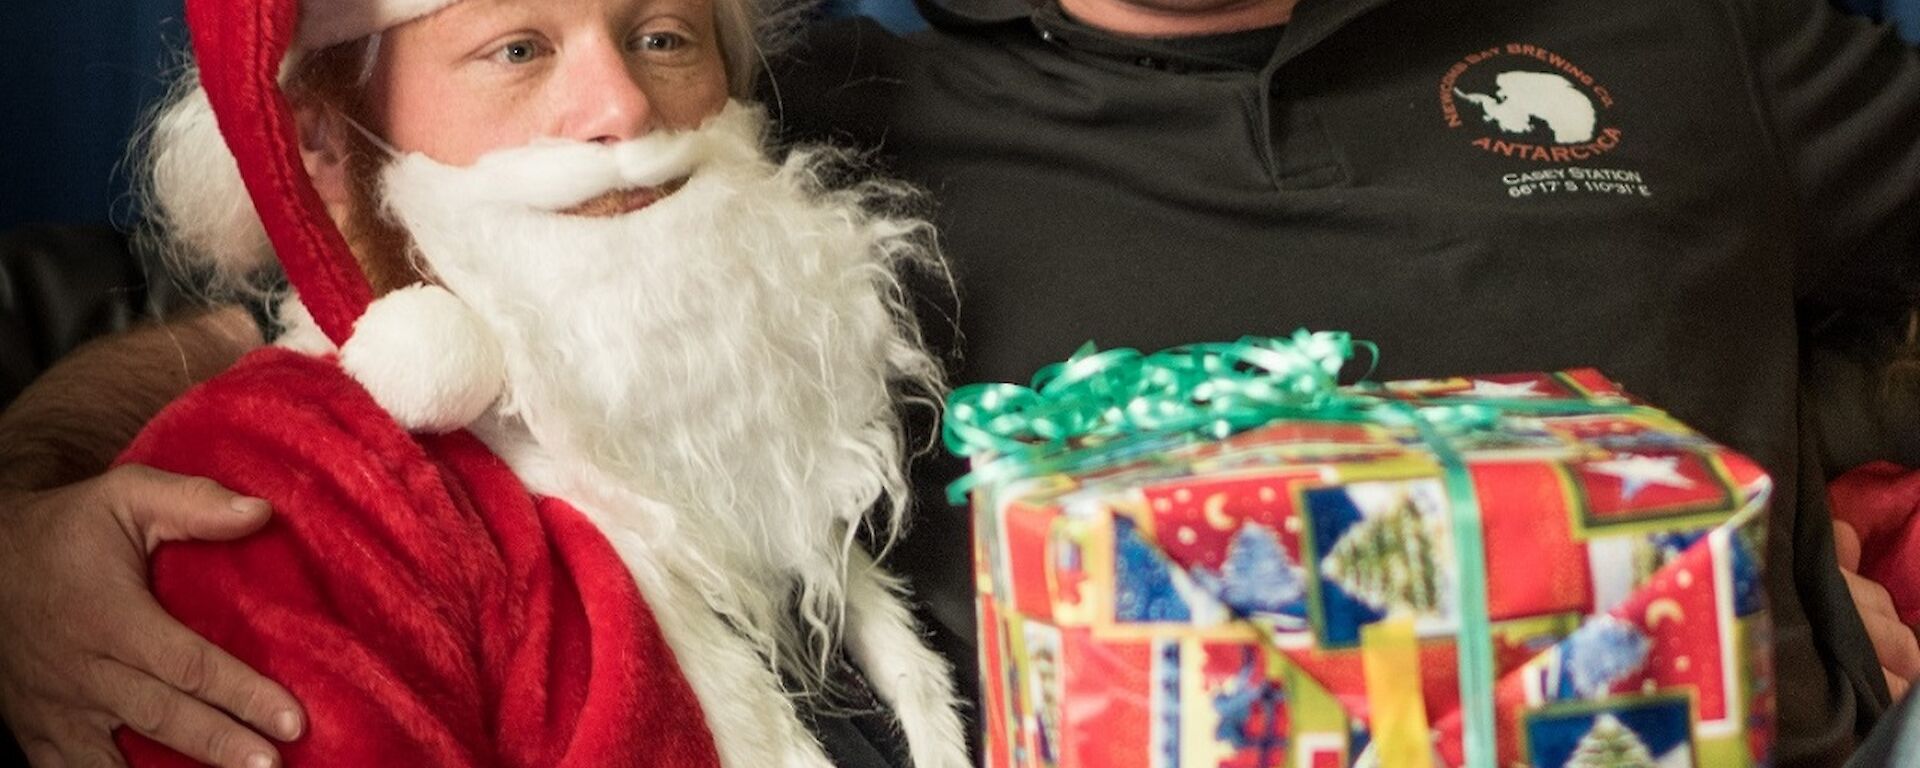 An expeditioner recives a Christmas gift from Santa